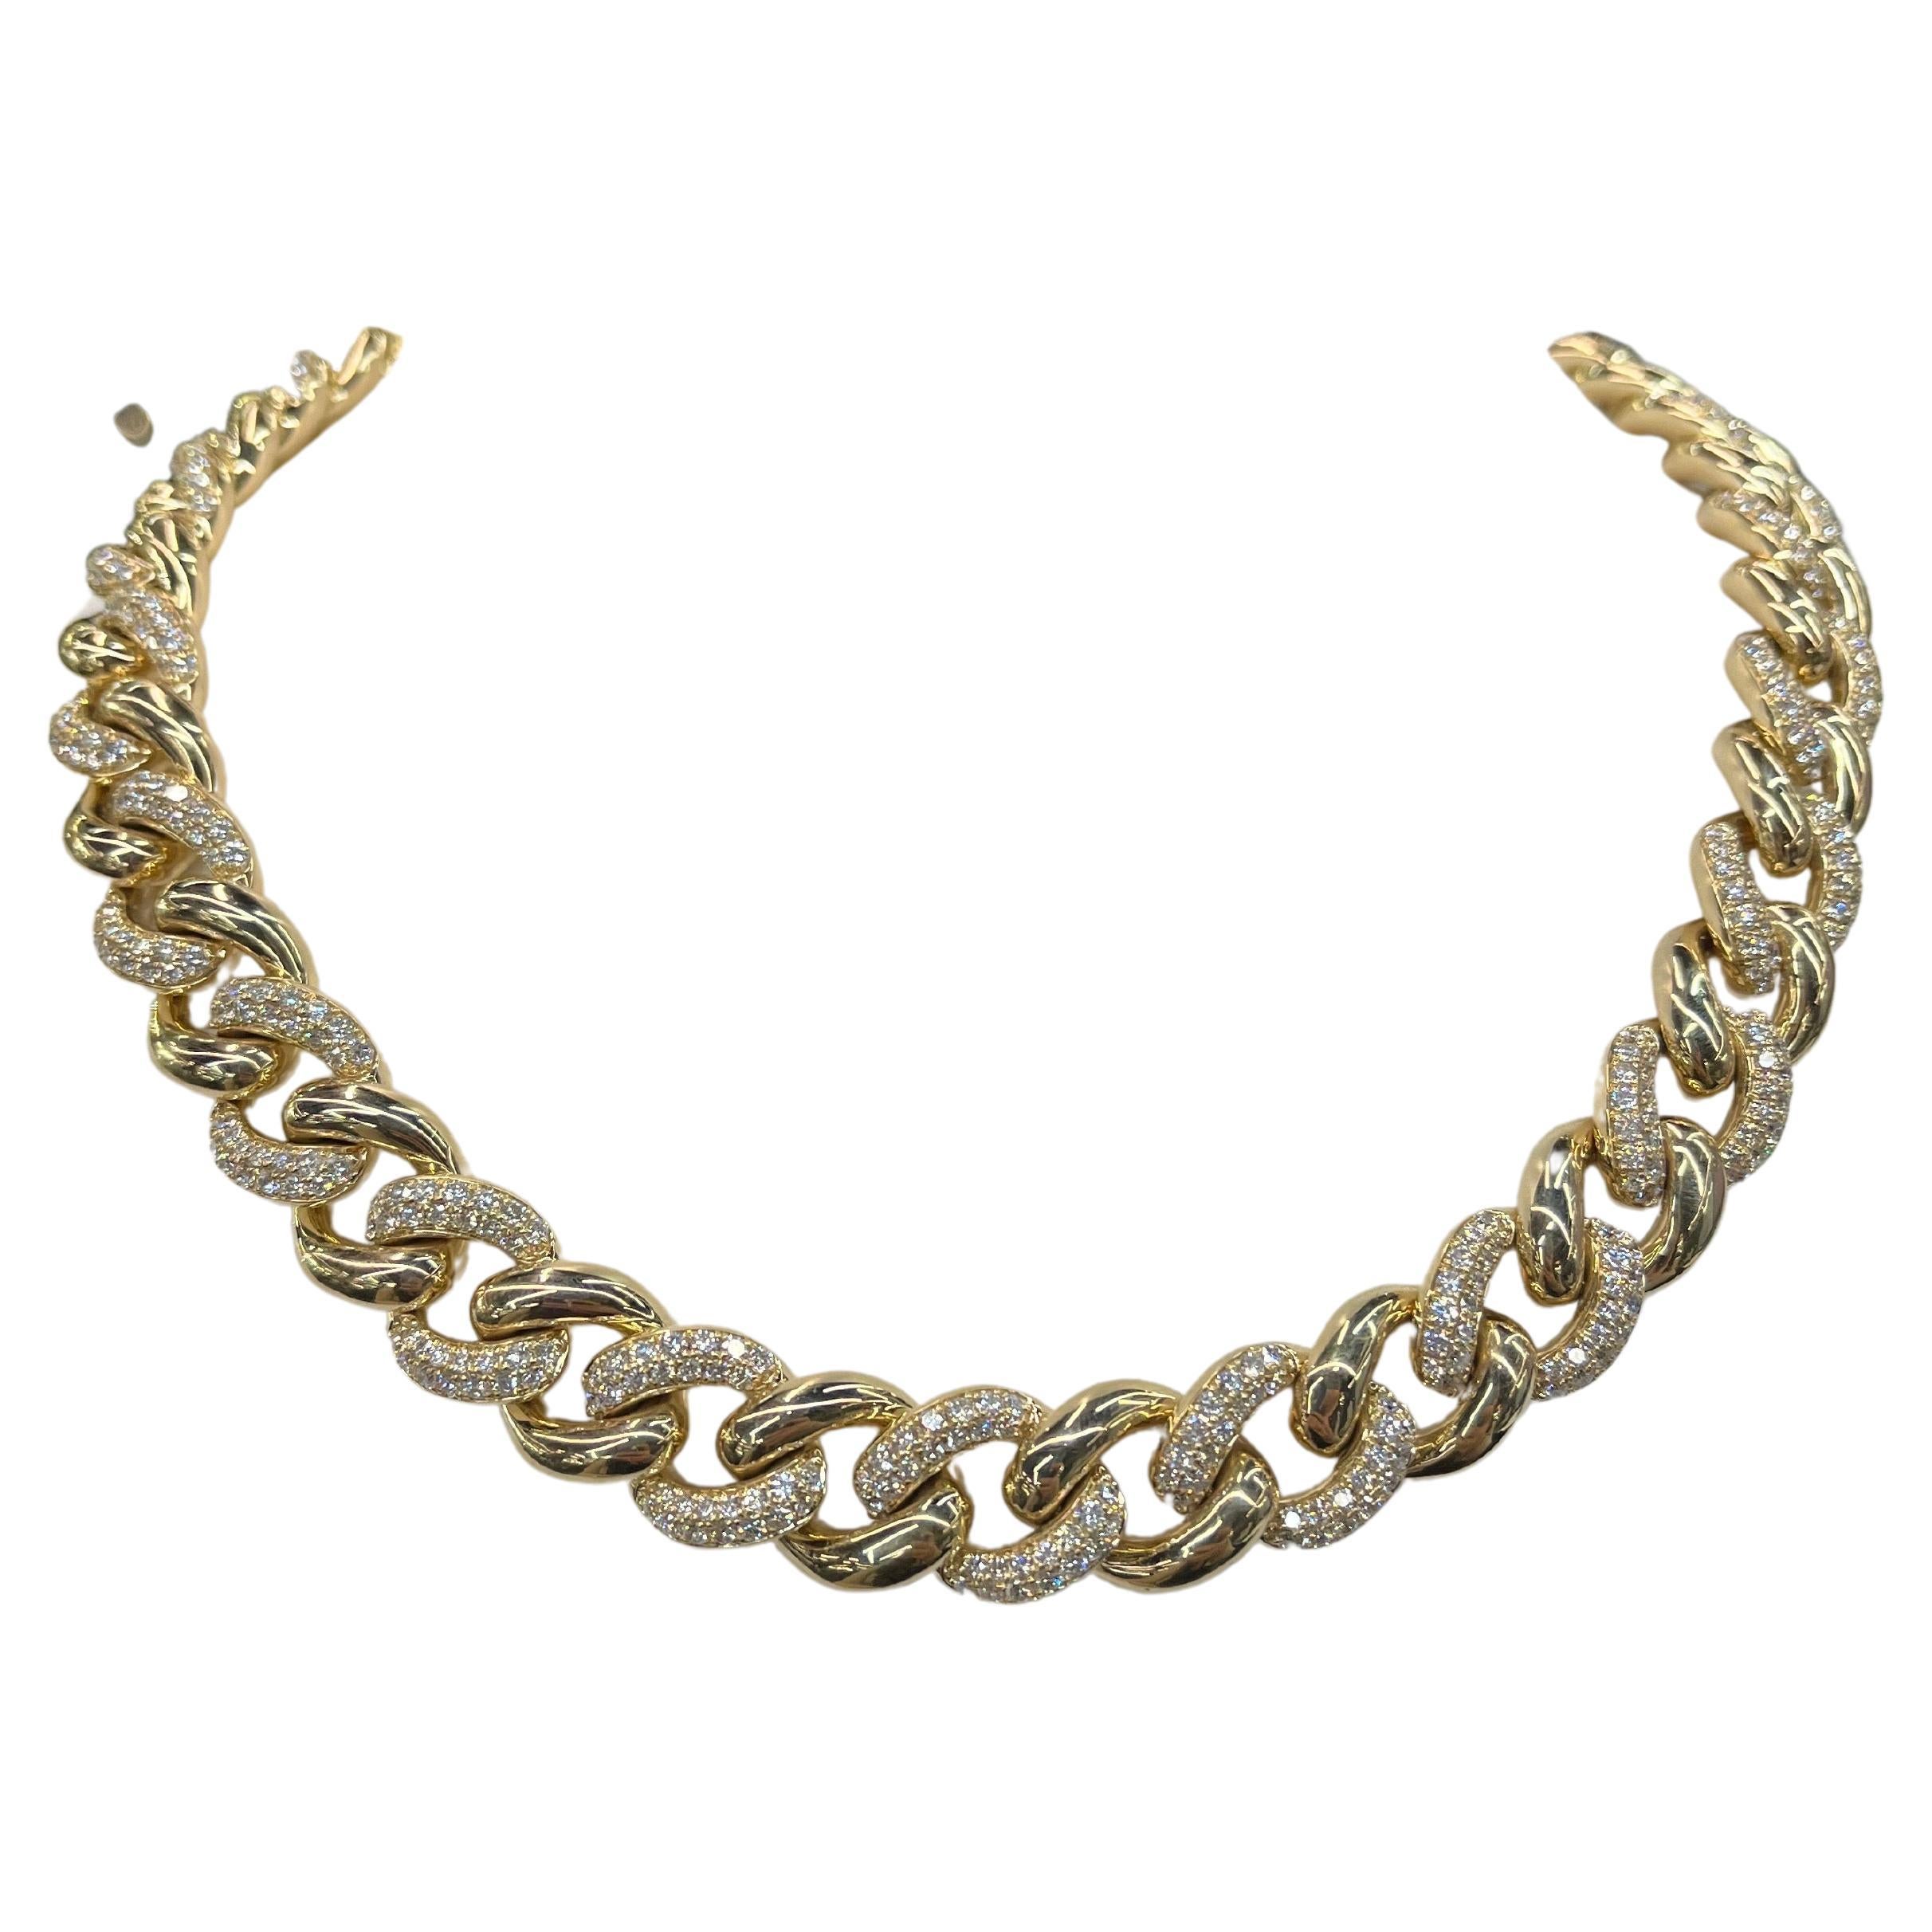 14 Karat Yellow Gold Cuban link necklace featuring alternating polished & diamond gold links with 642 Round Brilliants weighing 11.91 Carats.
Color G-H
Clarity SI
Very Sparkly! 
Comes in White Gold too.
DM for pricing. 